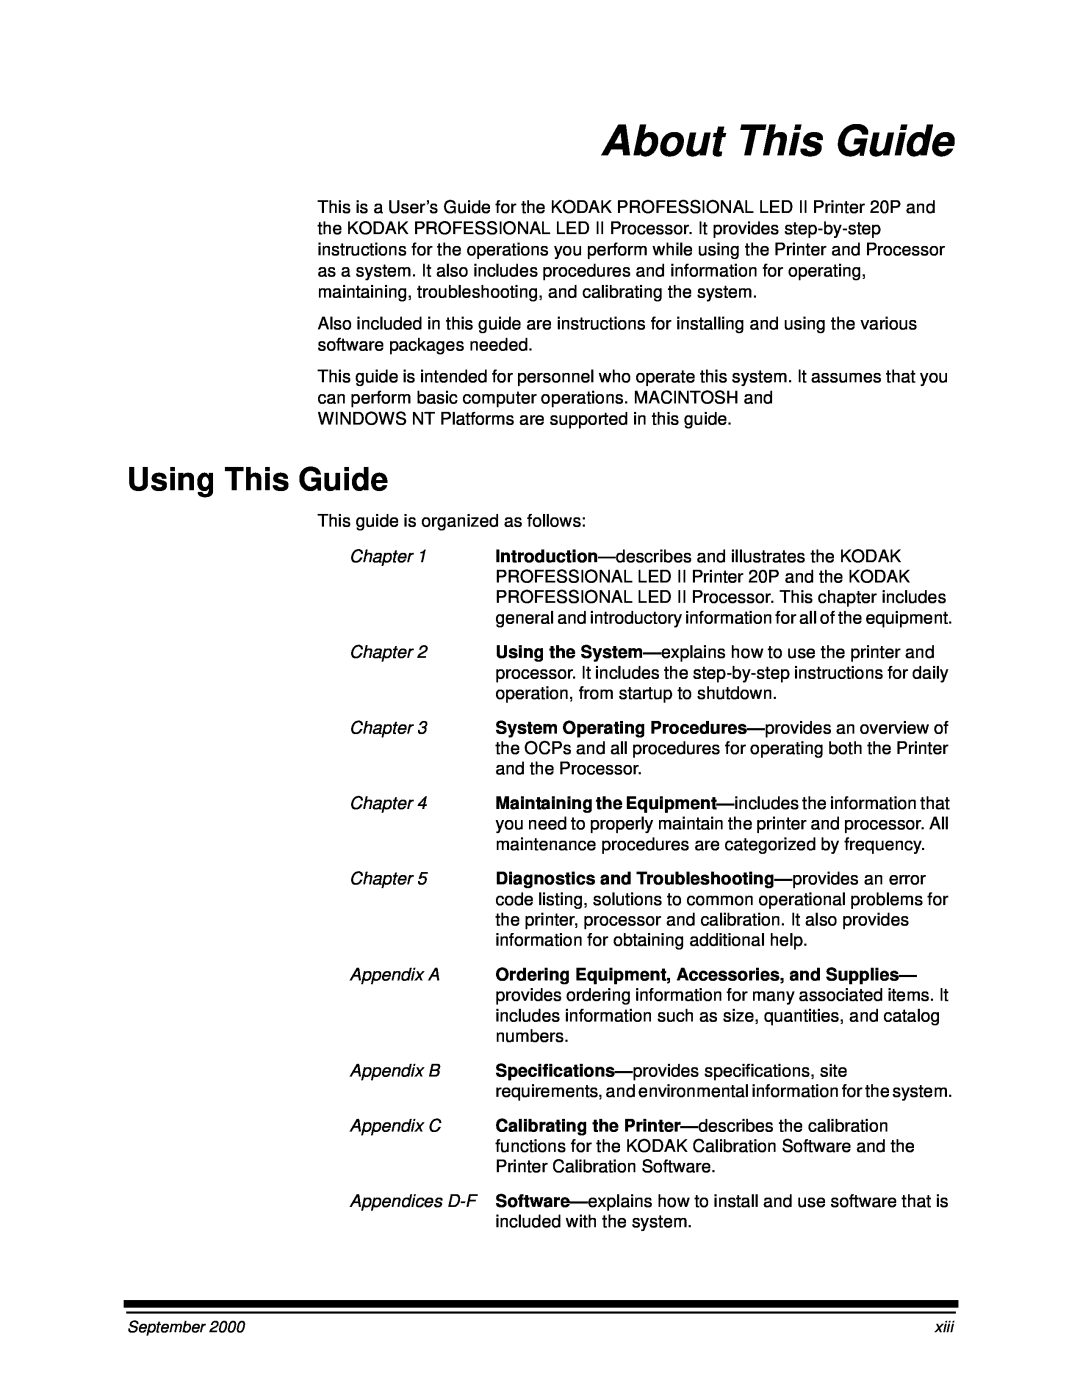 Kodak 20P manual About This Guide, Using This Guide, Chapter, Introduction— describes and illustrates the KODAK, Appendix A 